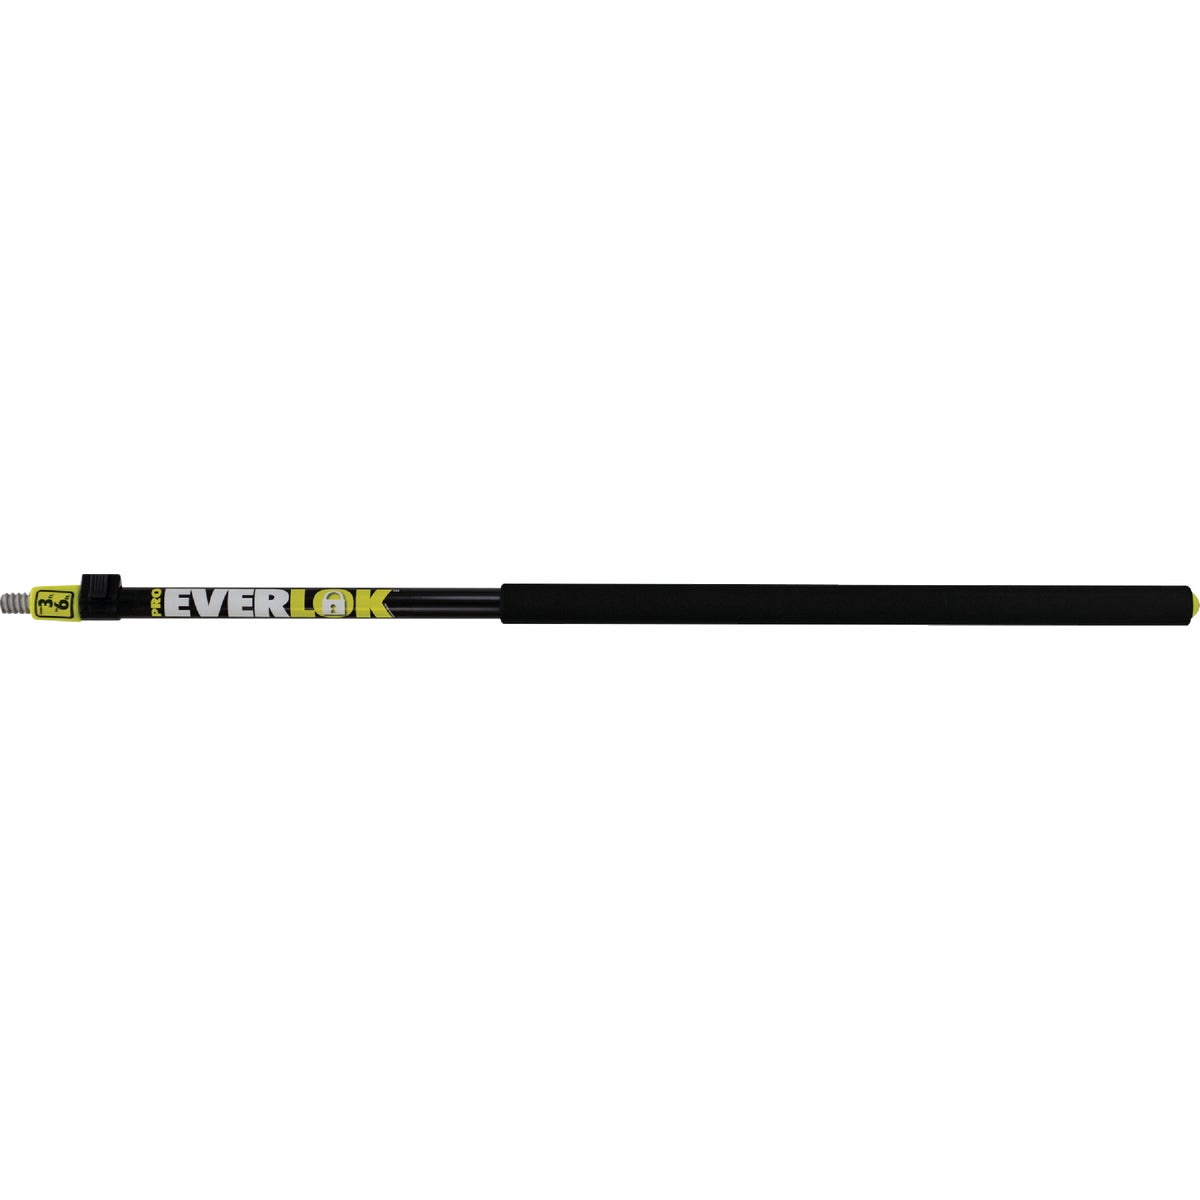 Item 774178, This easy-to-use extension pole has a exclusive variable position locking 